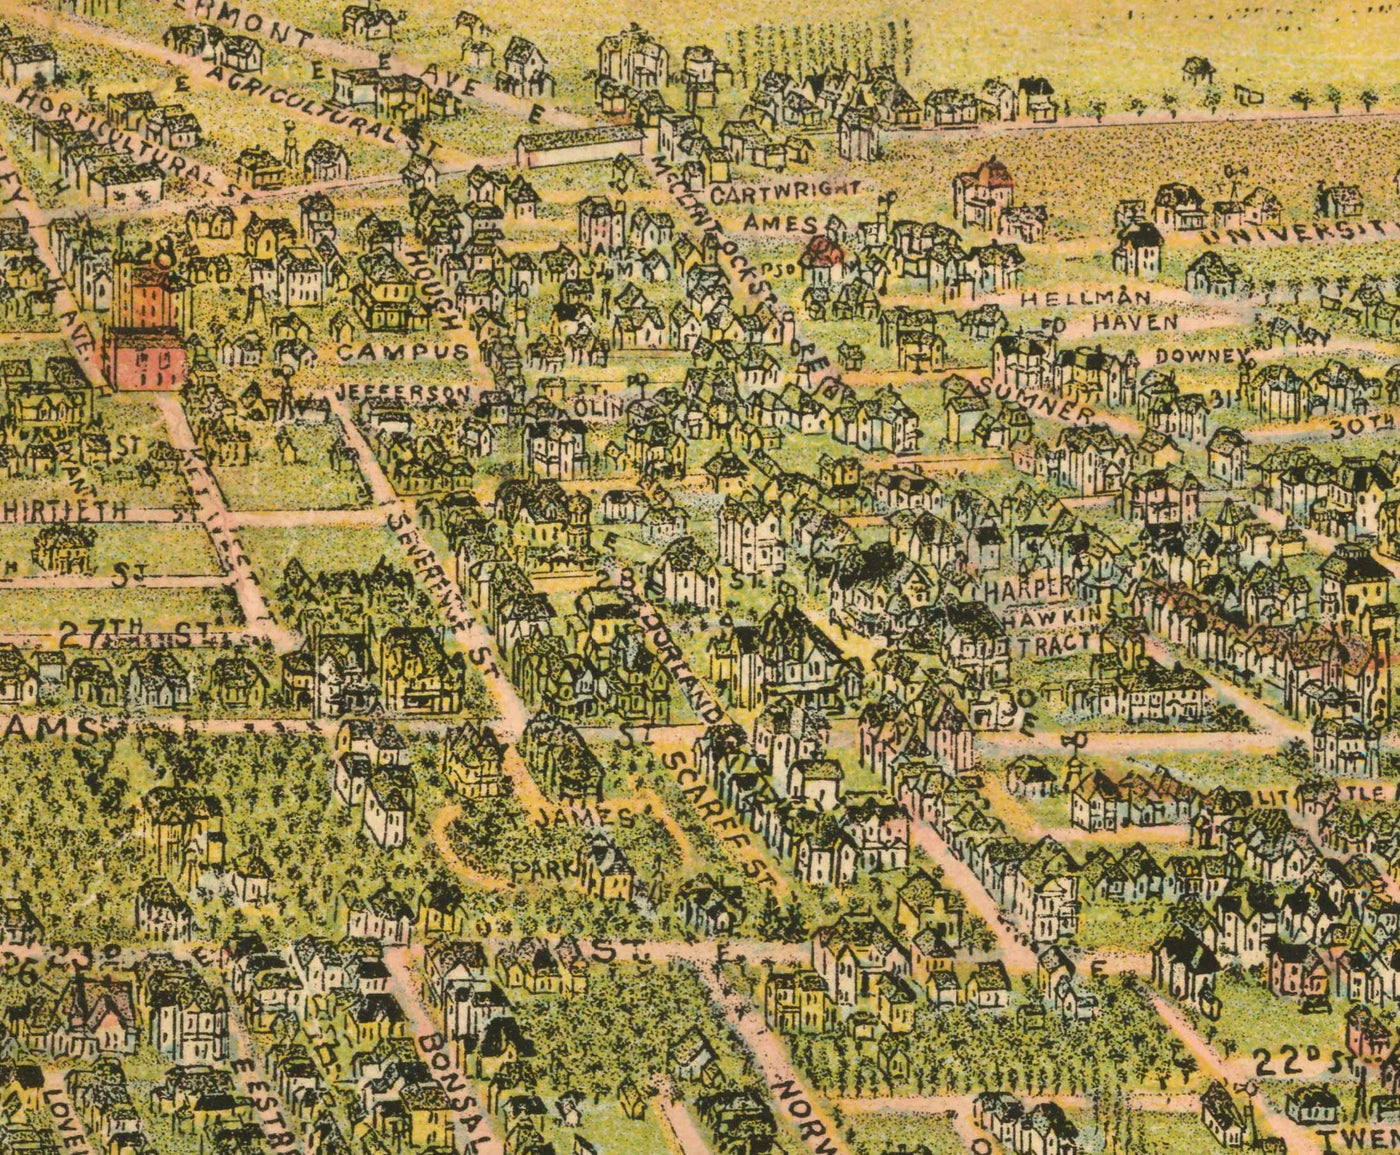 Old Birds Eye Map of Los Angeles in 1894 by BW Pierce - Downtown, Historic Southern LA, Pico, Inglewood, Pacific Ocean